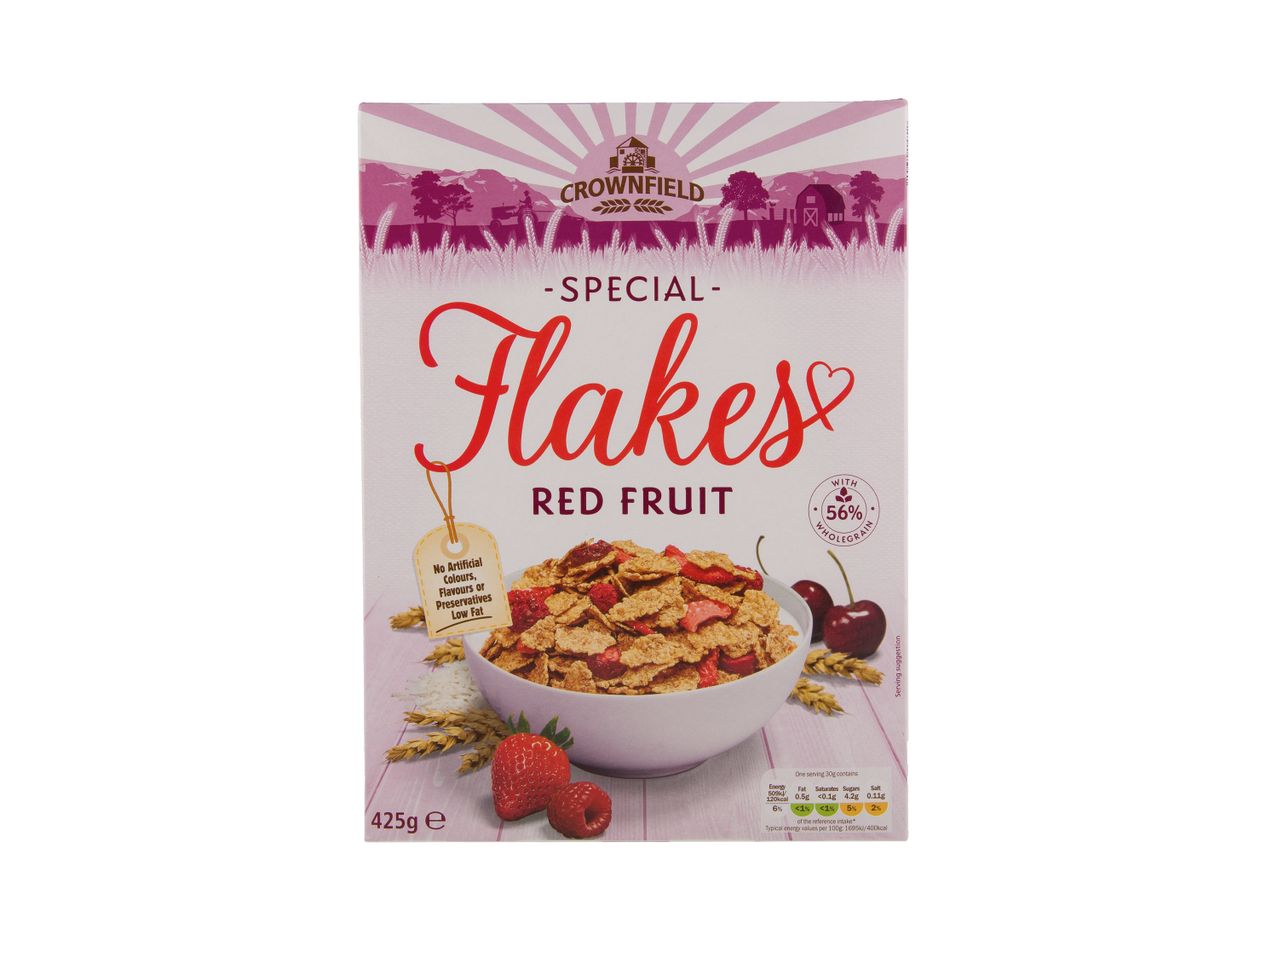 Go to full screen view: Special Flakes Red Berries - Image 1